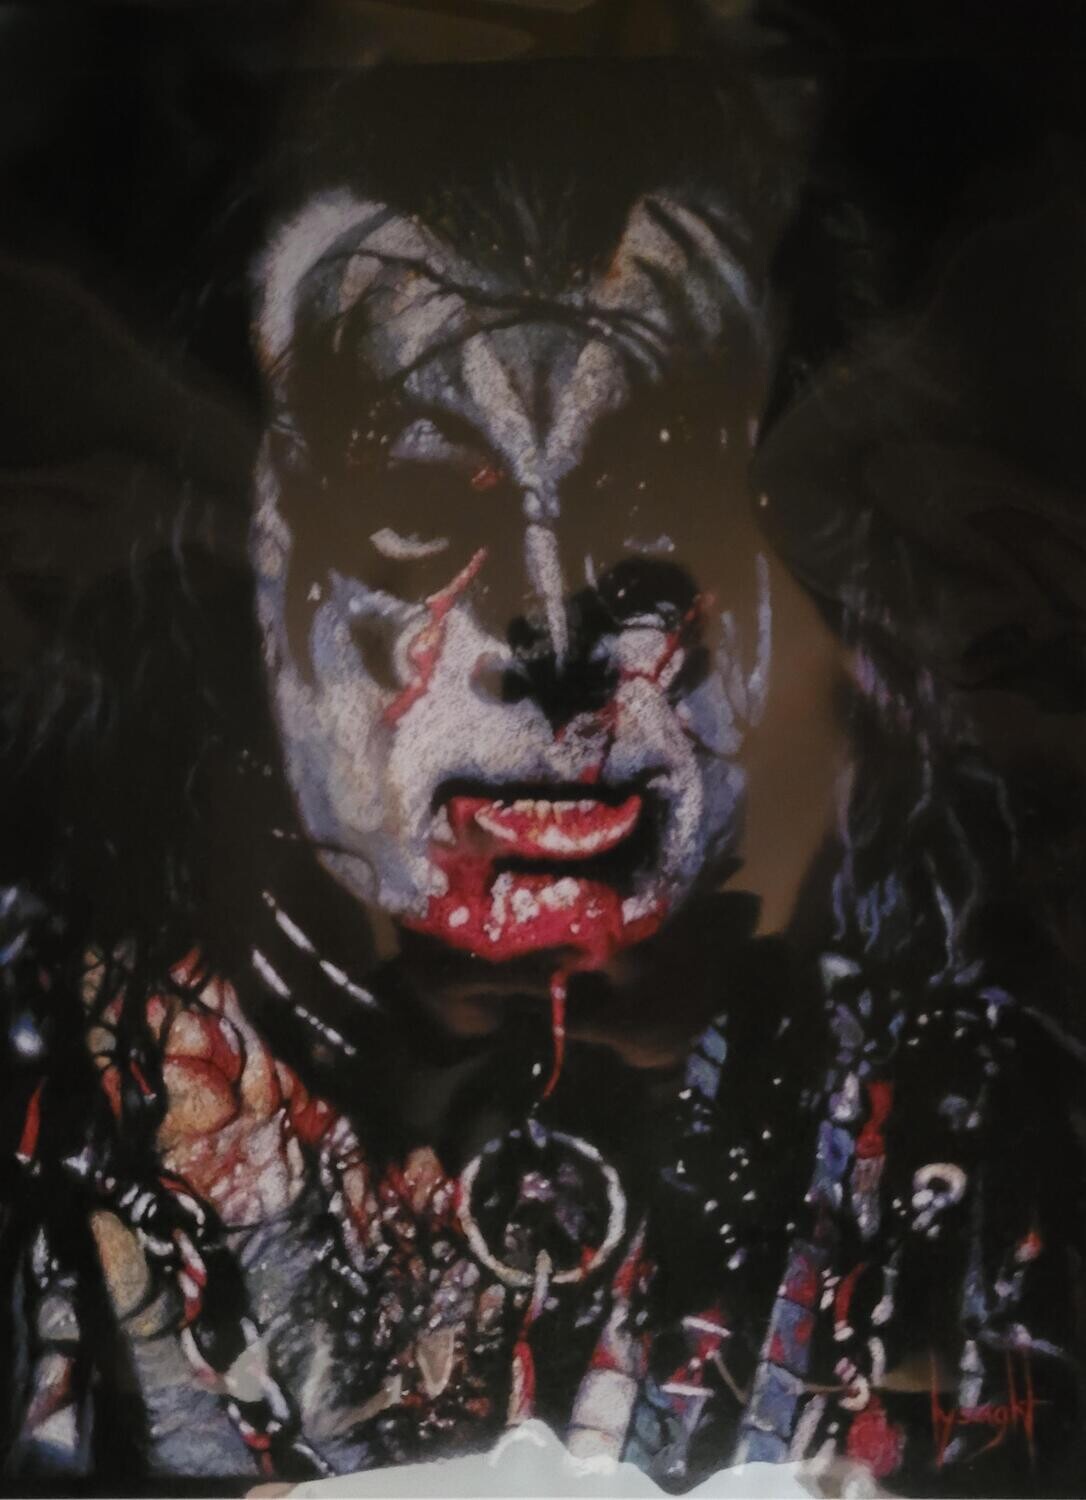 Hand Painting of Gene Simmons from Kiss - (Comes Framed)